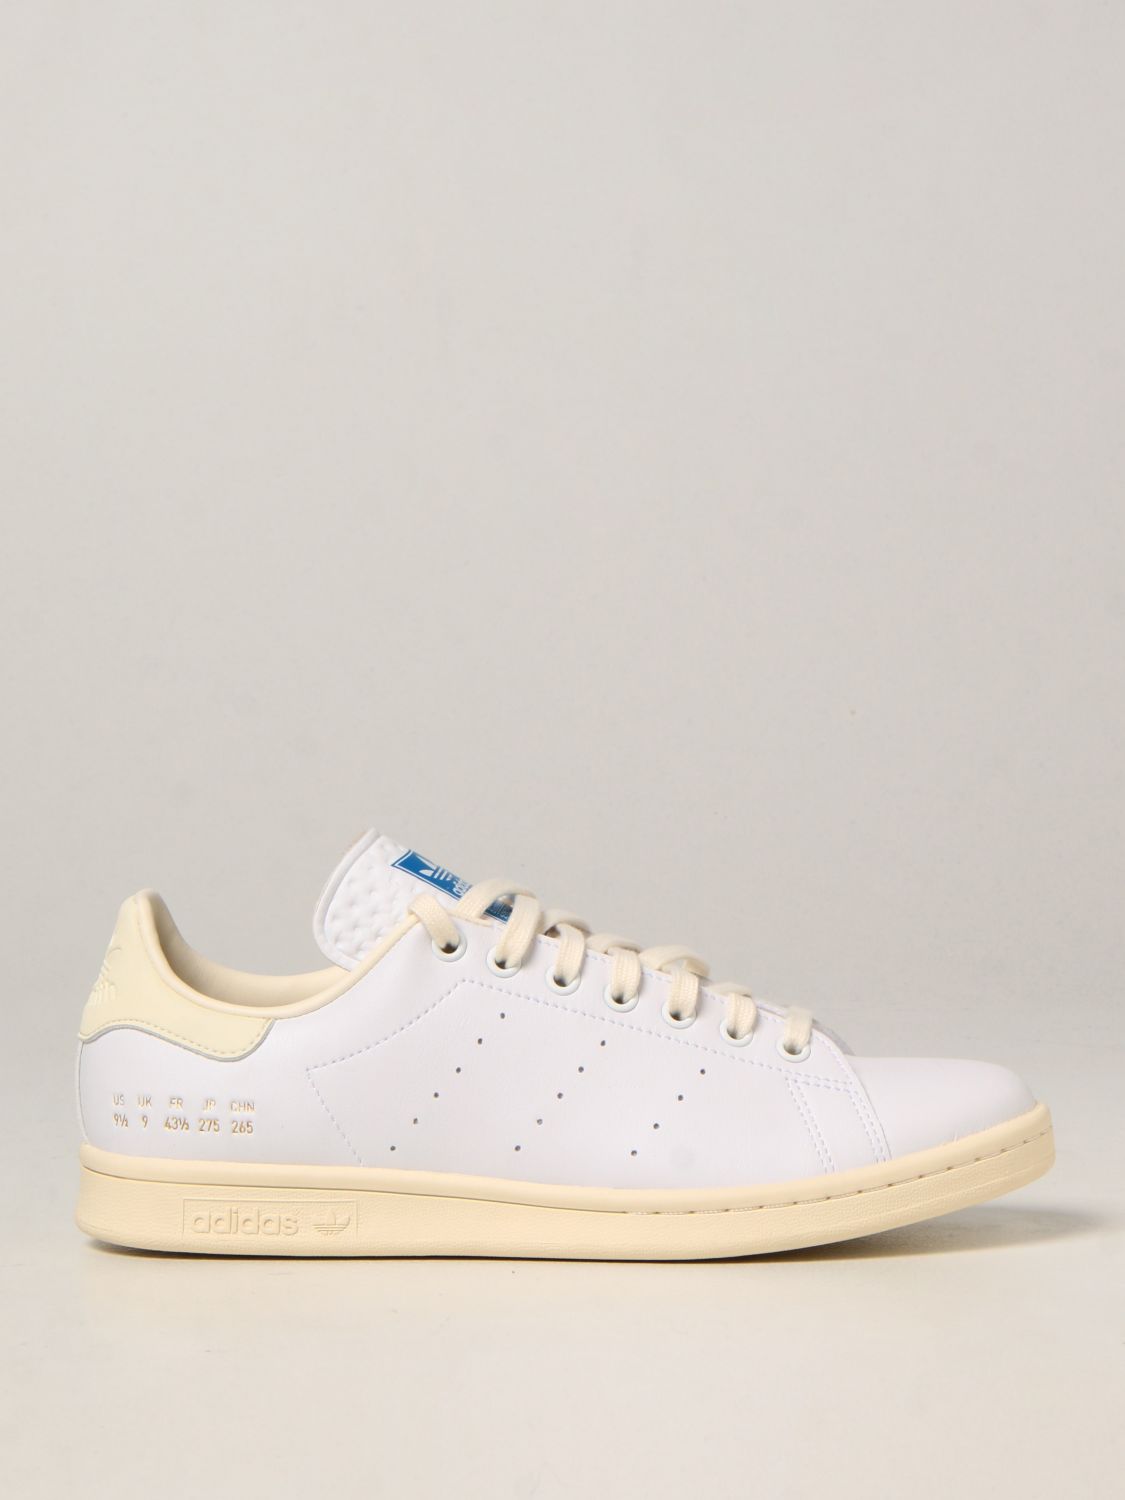 adidas originals stan smith trainers in white s80026